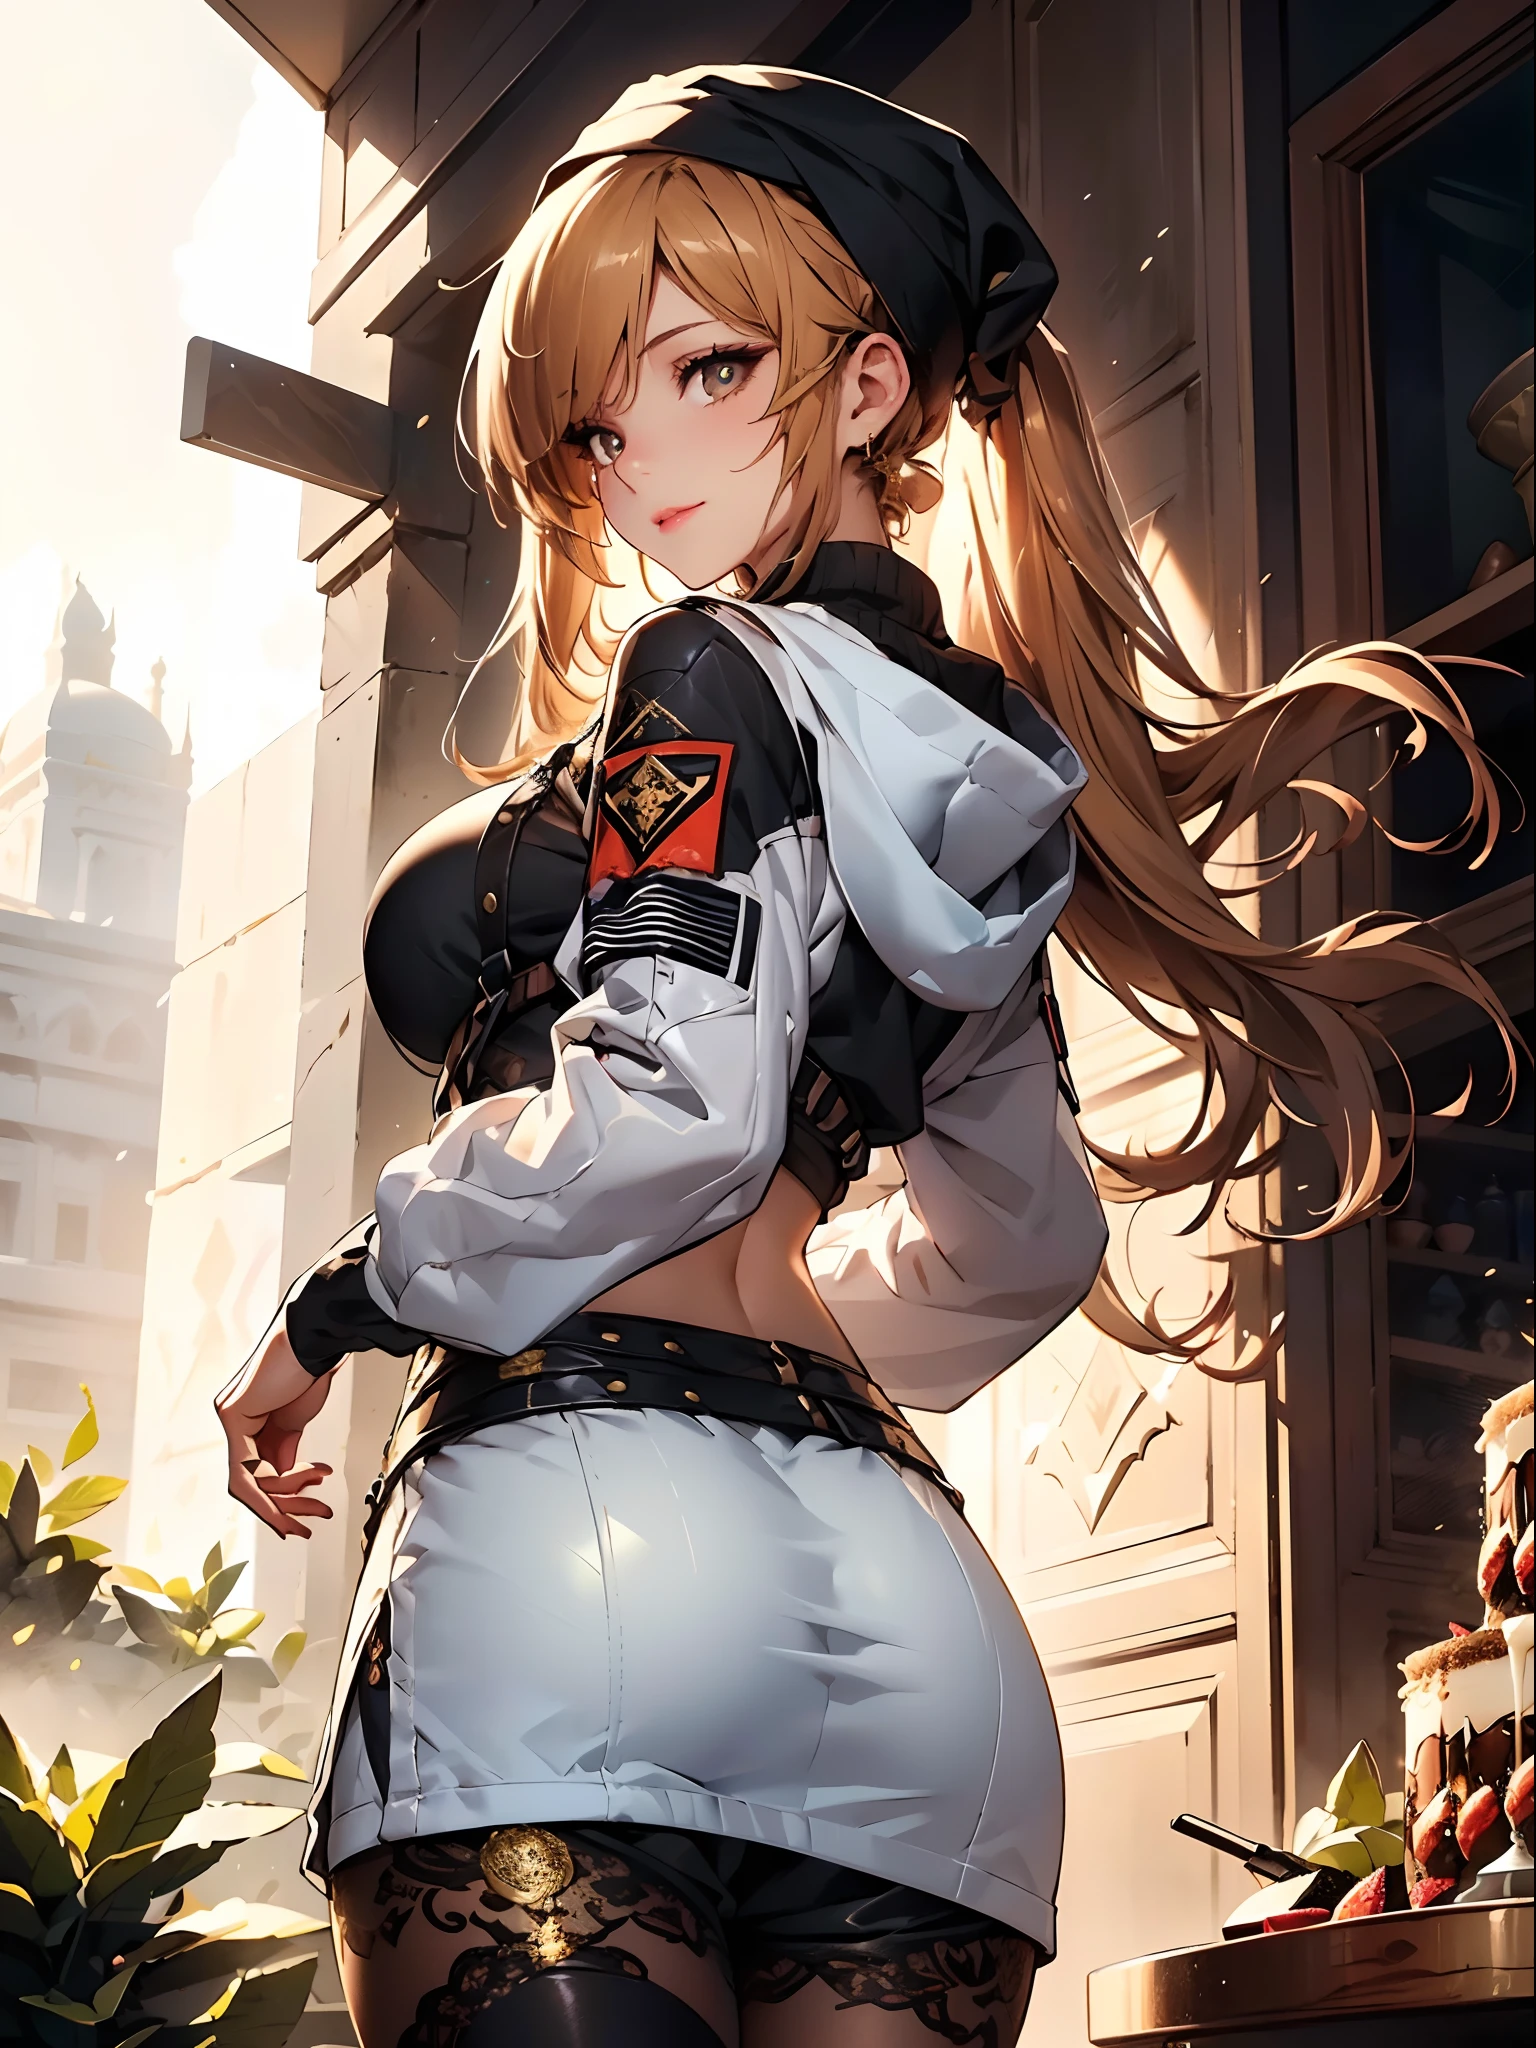 Post apocalyps, ((in a dessert:1.5)), a matured woman with long hair and a white outfit, (standing at oasis:1.2), Arabian, from arknights, artwork in the style of guweiz, bodyesbian, fine details. girls frontline, beautiful anime illustration, from girls frontline, by Yang J, stunning, 26 years old, (solo:1.5), (sfw:1.25), sagging breast, Big breasts, big , thin waist, big ass, Raised sexy, (dark mahogany medium long hair, updo, hair over one eye, asymmetric hair, Carly hair, low tied),(musulman, Headscarfs, hair bands, head vandage, Turban), (ultra high resolution, 8K RAW photo, photo realistics, weak outline:1.3), best qualtiy, natural lighting, blurry back ground, field depth, (Bright pupils, detailed beautiful eyes, high detailed face), Red lip, looking at viewers, (tight focus:1.2, from below), sexy posing, seductive weak smiling, center image, (wearing white tactical jacket and clothes, wearing short pants, gold ornaments, white clothes rolling around chest, camel-brown long leather boots, translucent lace pantyhose), ((correct anatomy:1.5)), ((outdoor:1.2)),